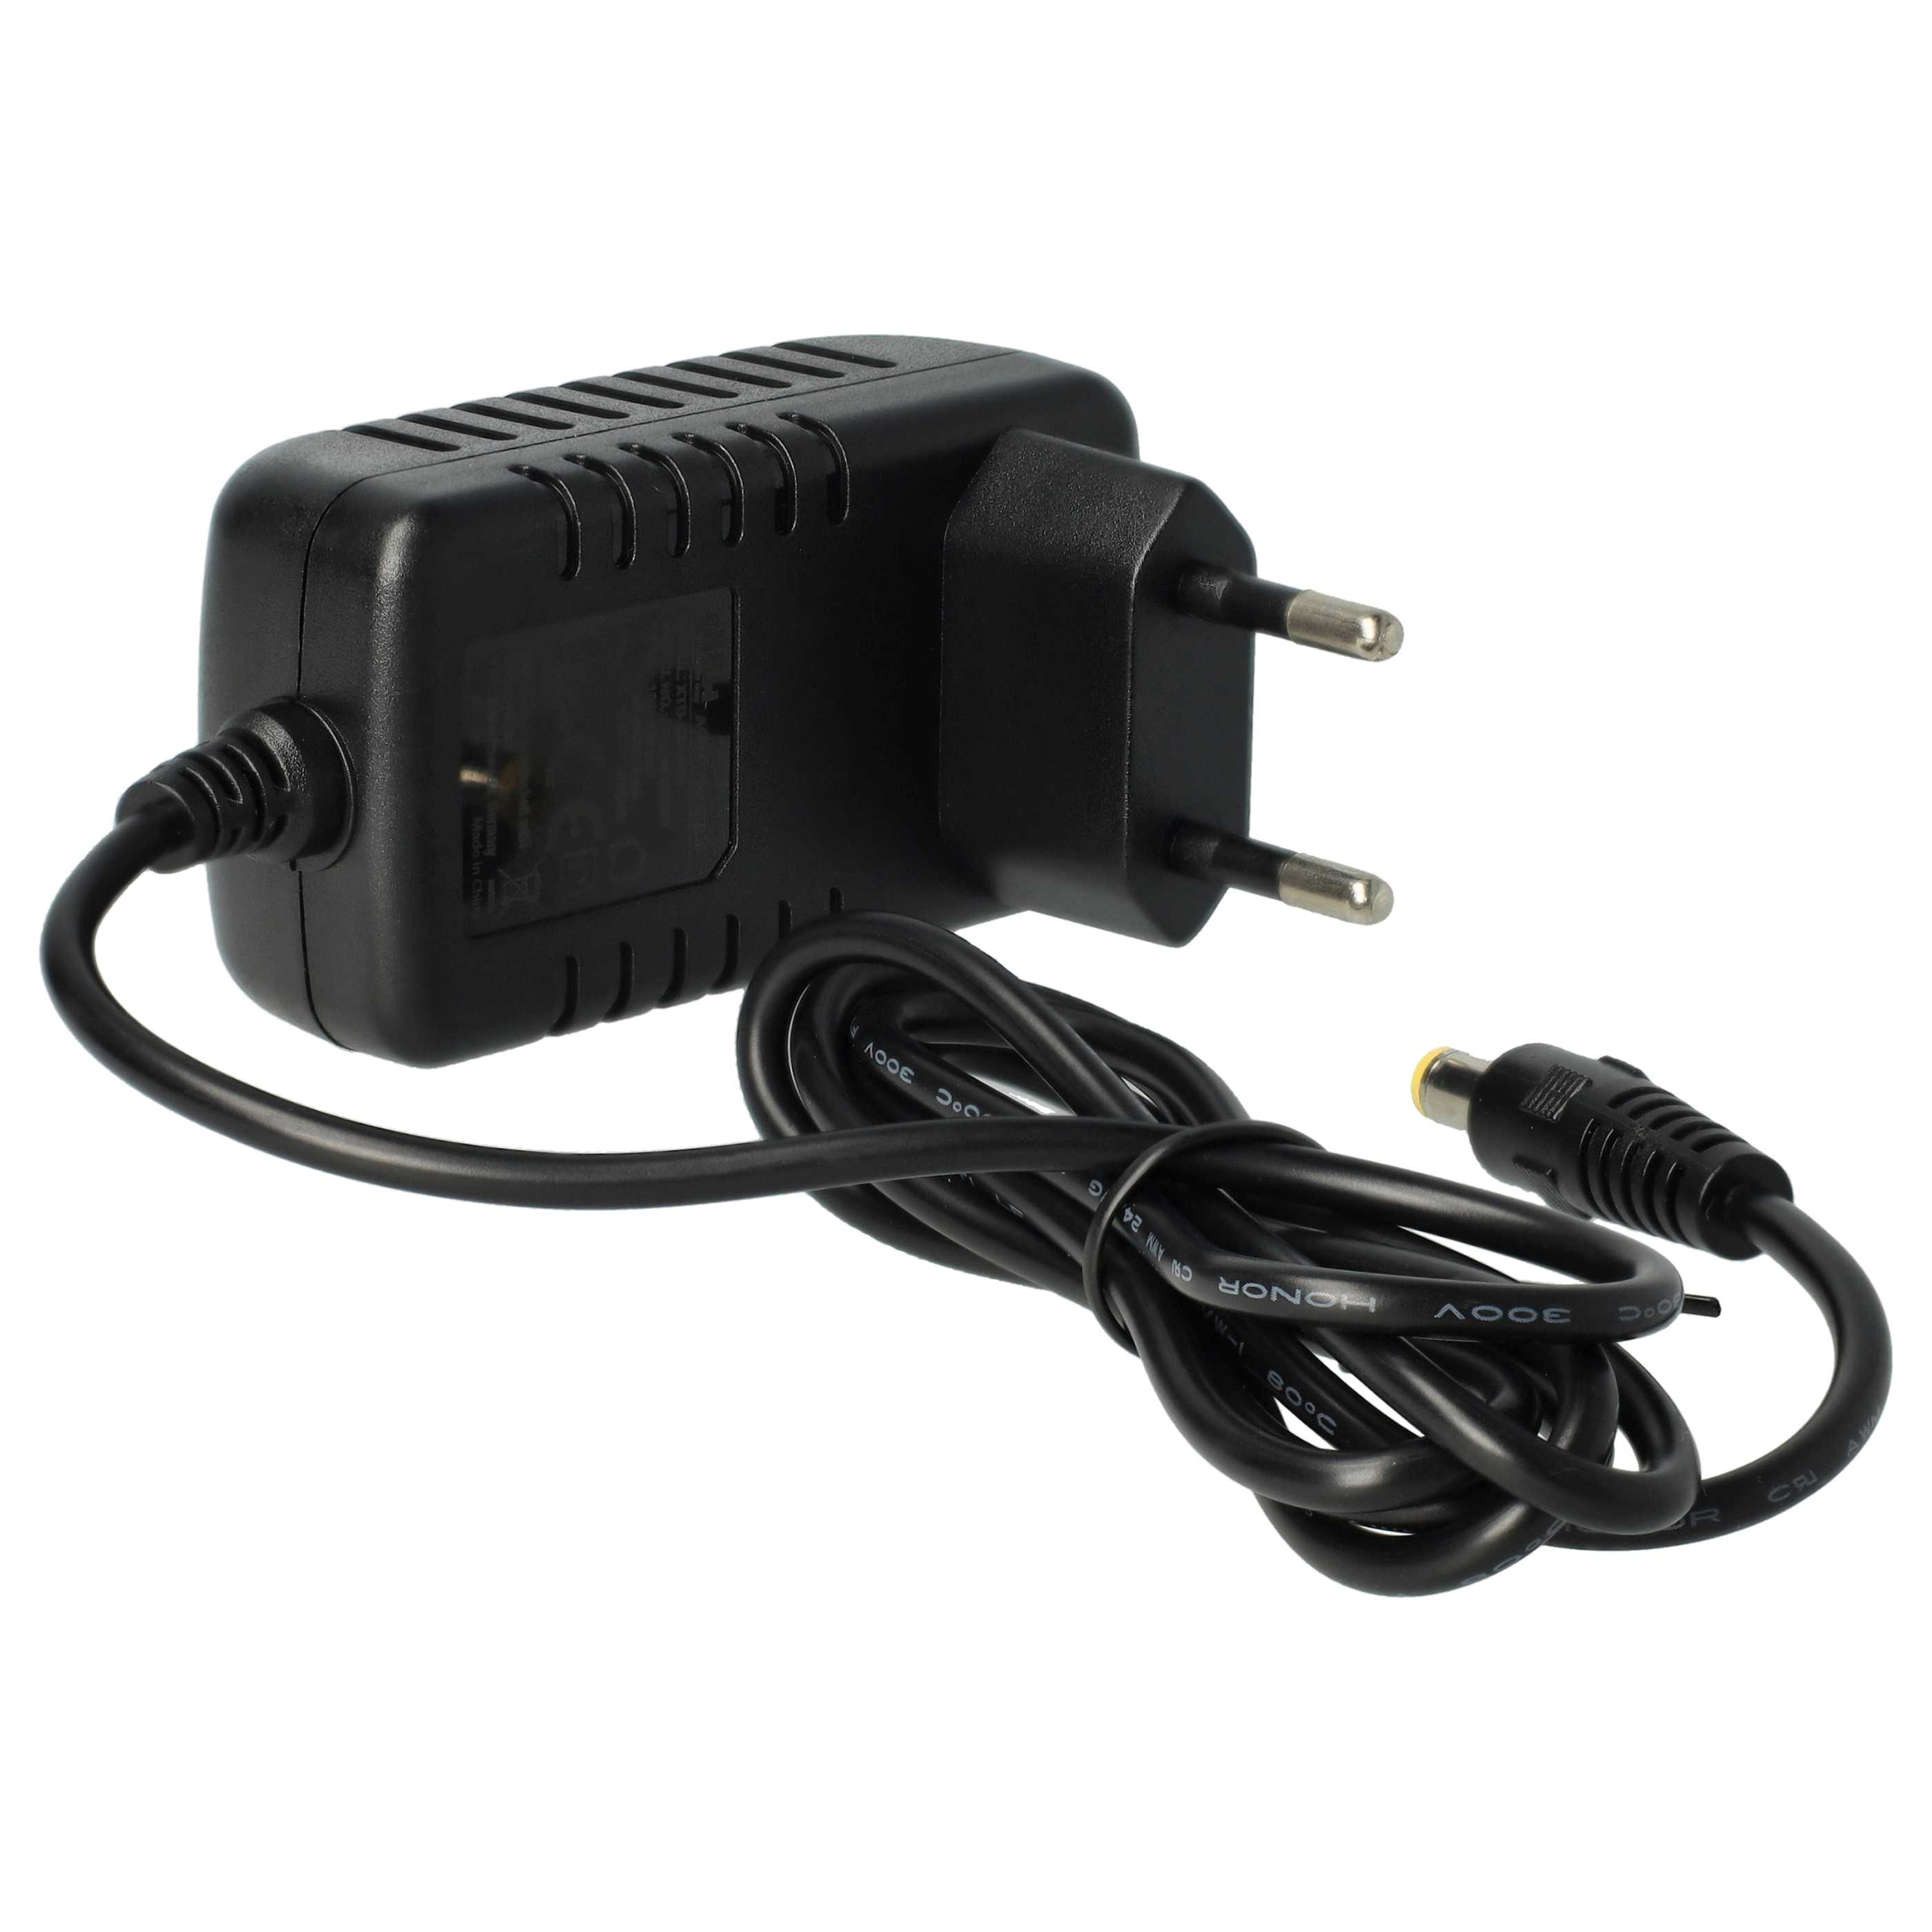 Mains Power Adapter replaces ADS0128-B 120100, DVE DSA-12G-12 FEU 120120 for Electric Devices - 140 cm 12 V